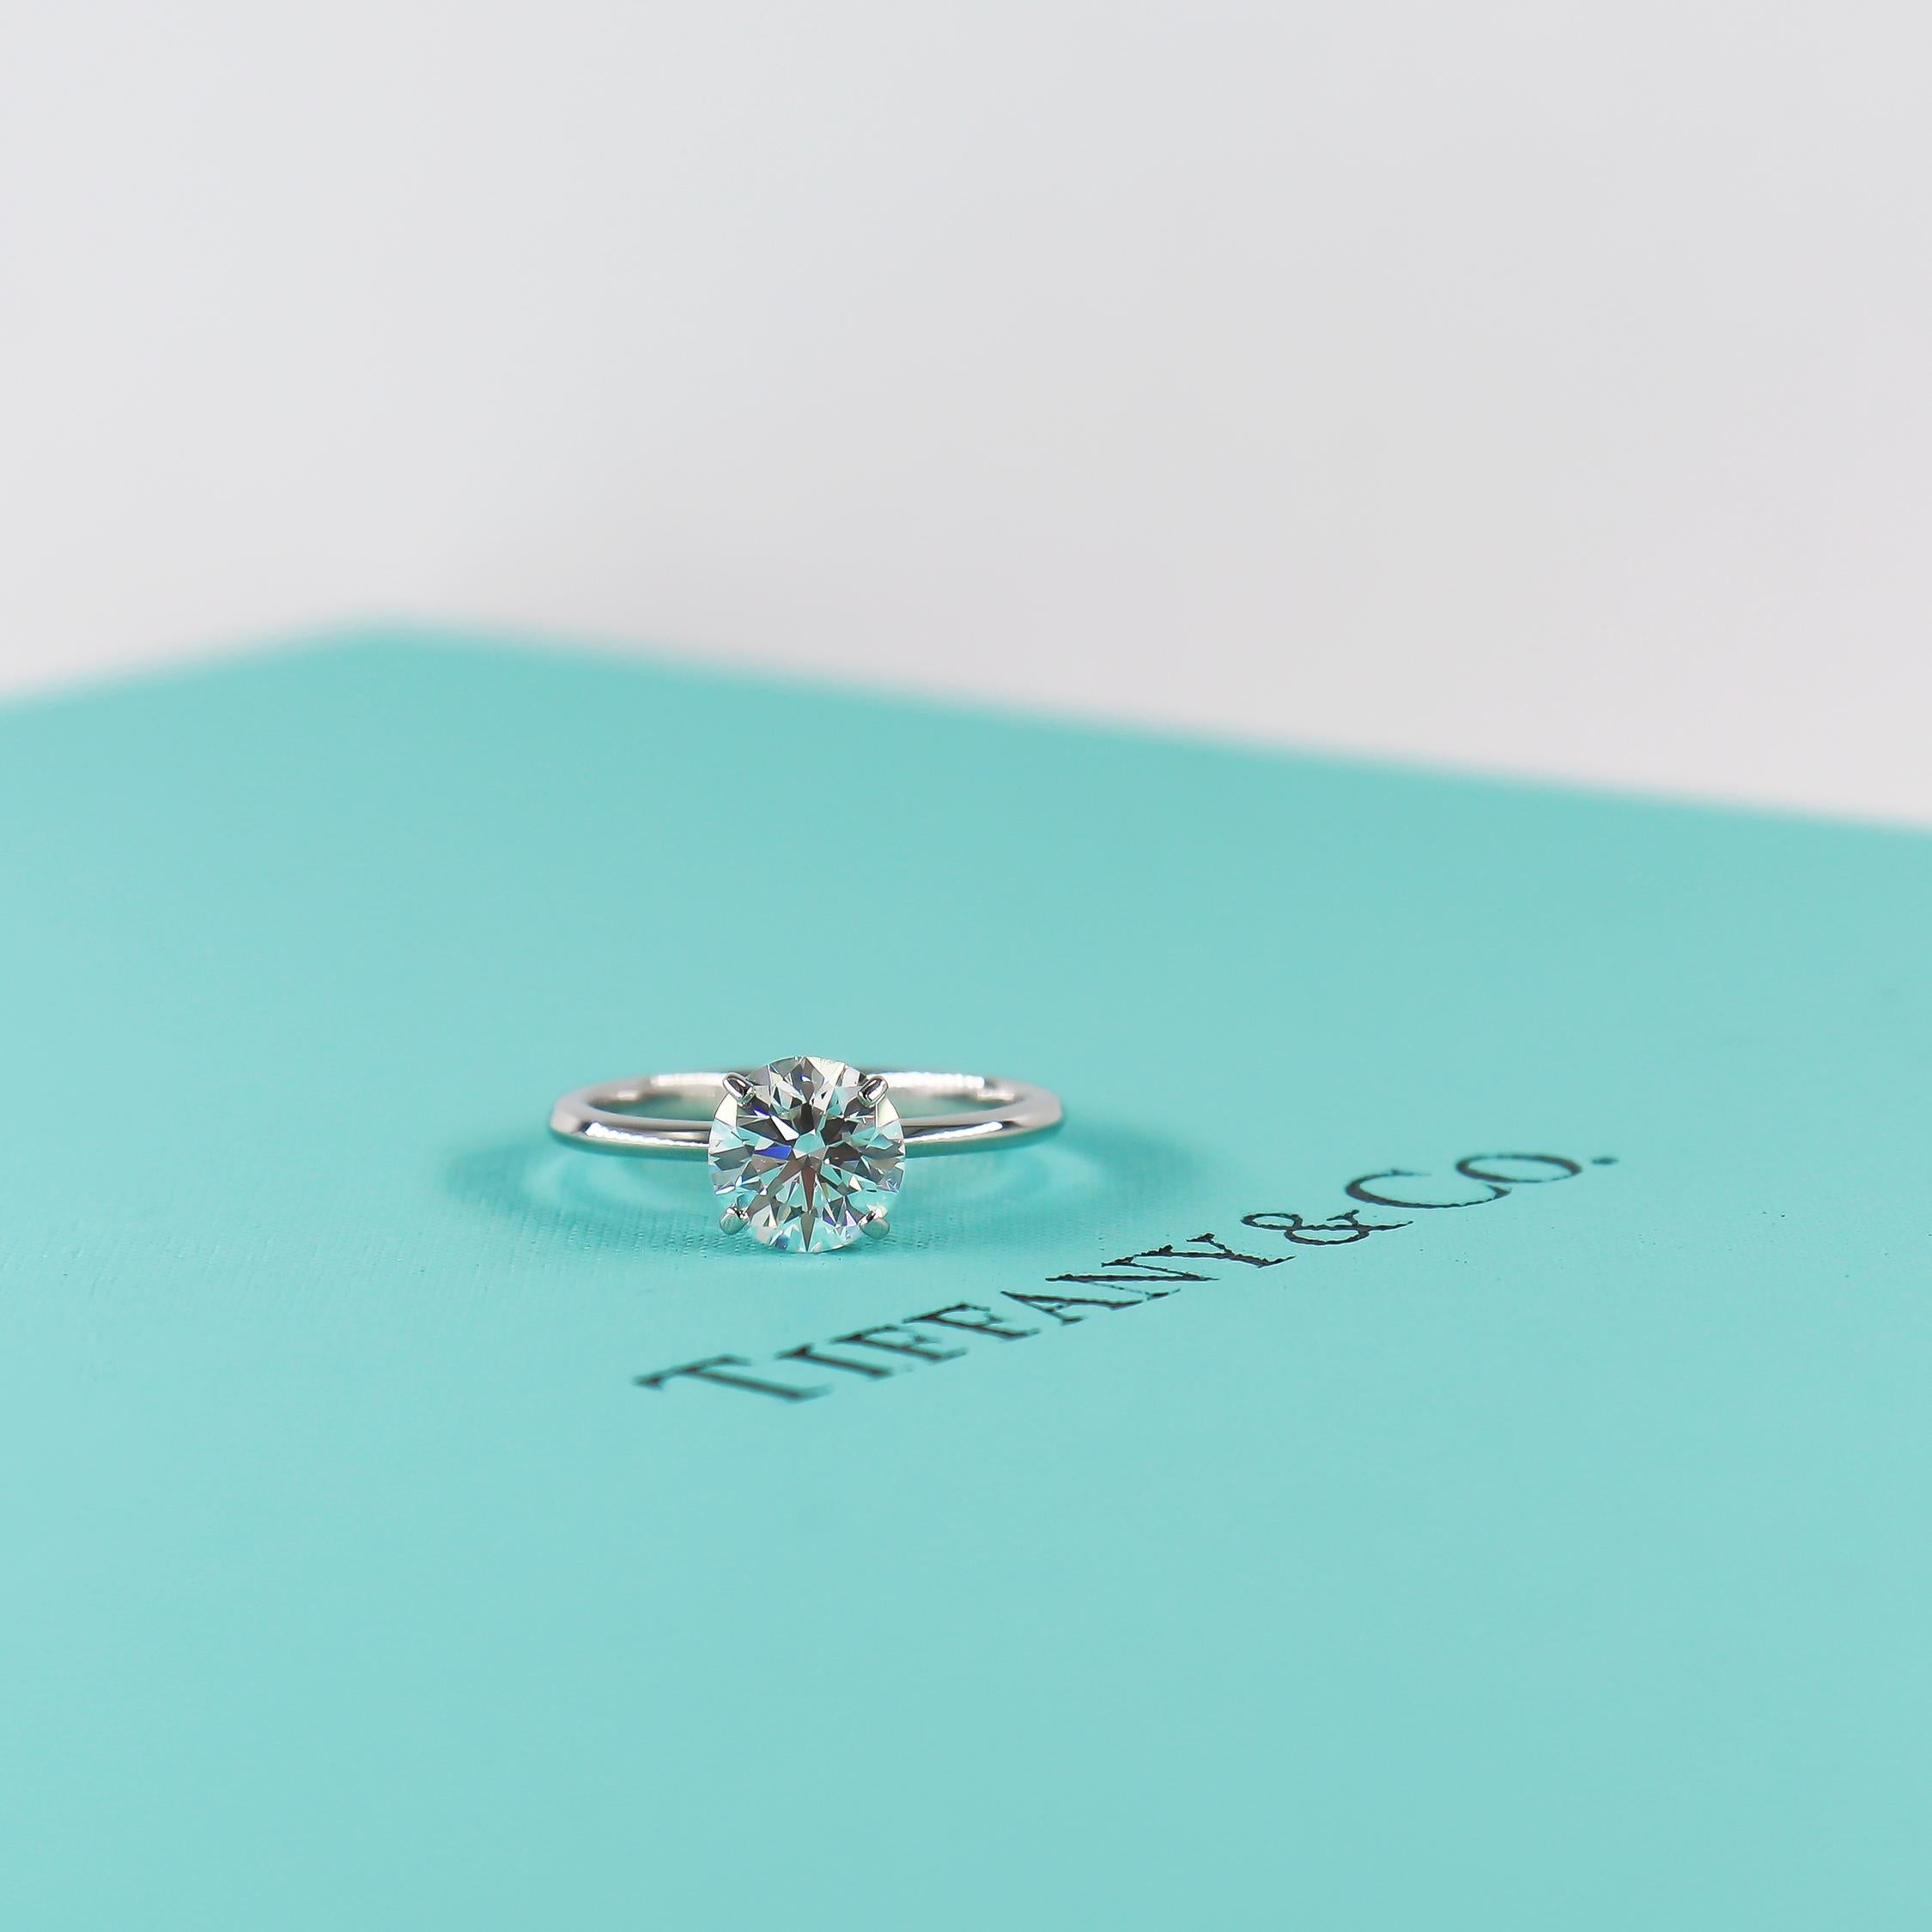 Nothing says classic romance like a Tiffany & Co engagement ring! This stunning solitaire is Tiffany's latest engagement ring design, the Tiffany True. Introduced in 2018, the Tiffany True solitaire has a delicate platinum band and the diamond is